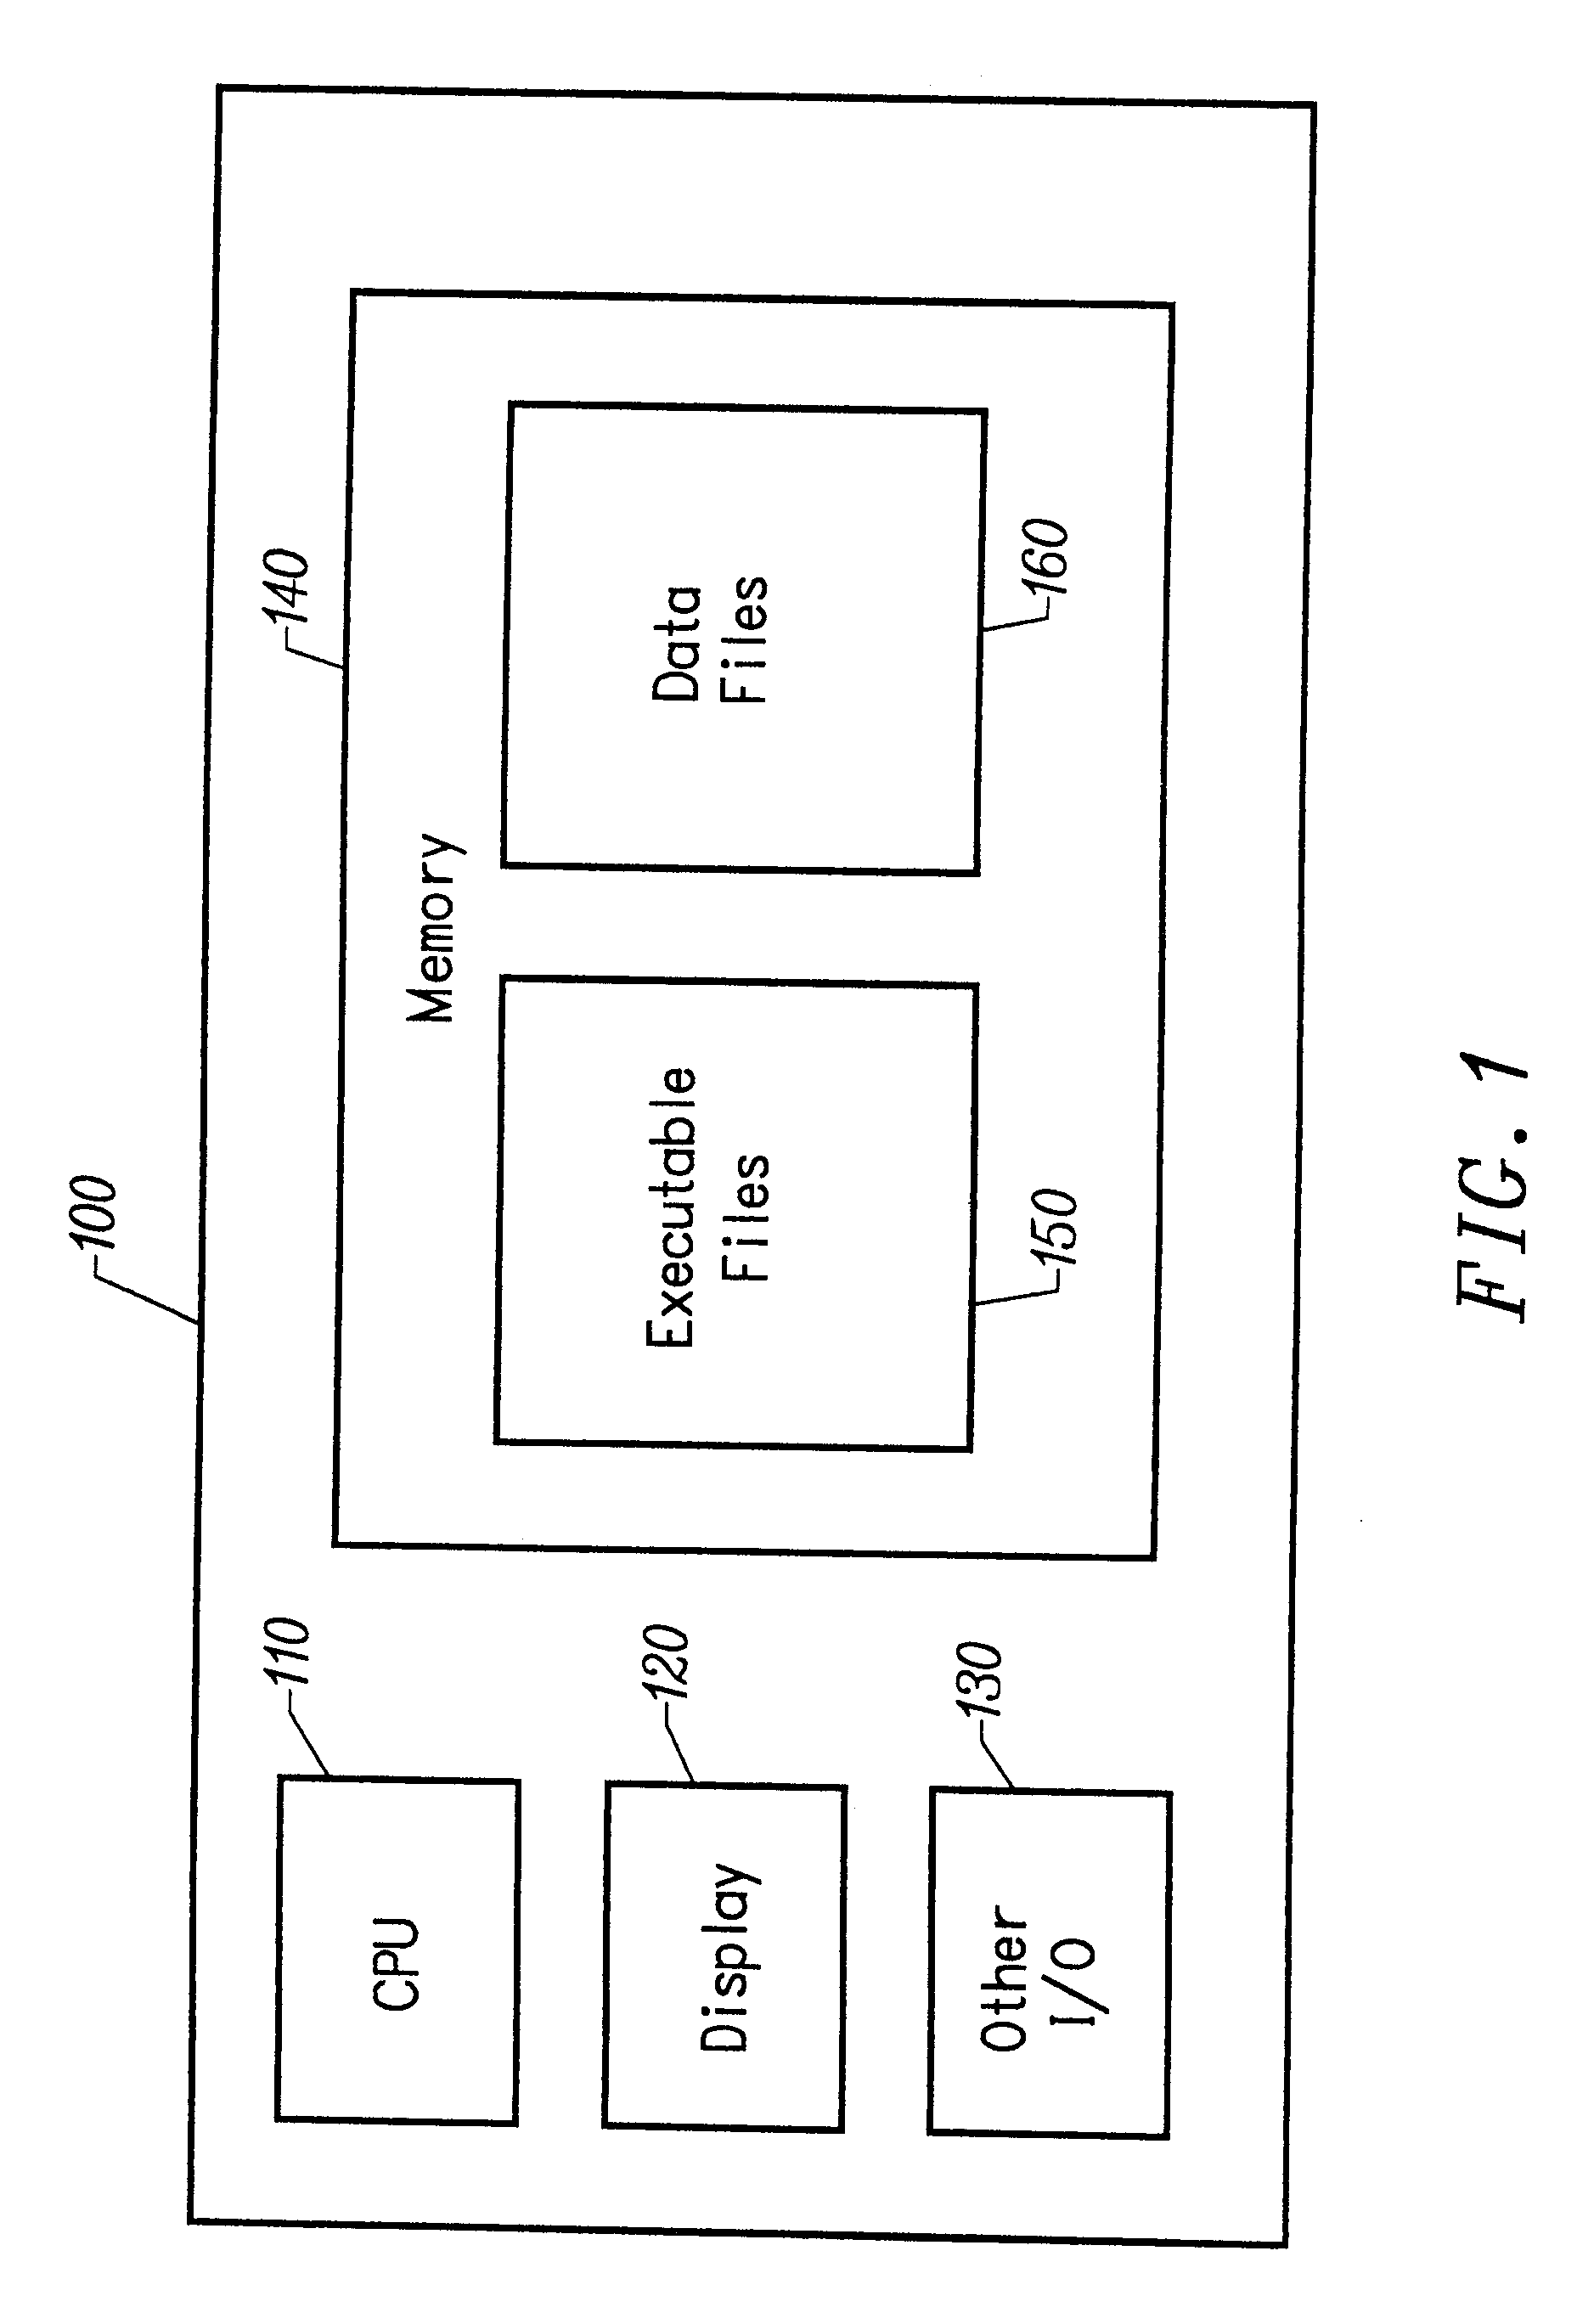 Methods for producing highly compressed software products